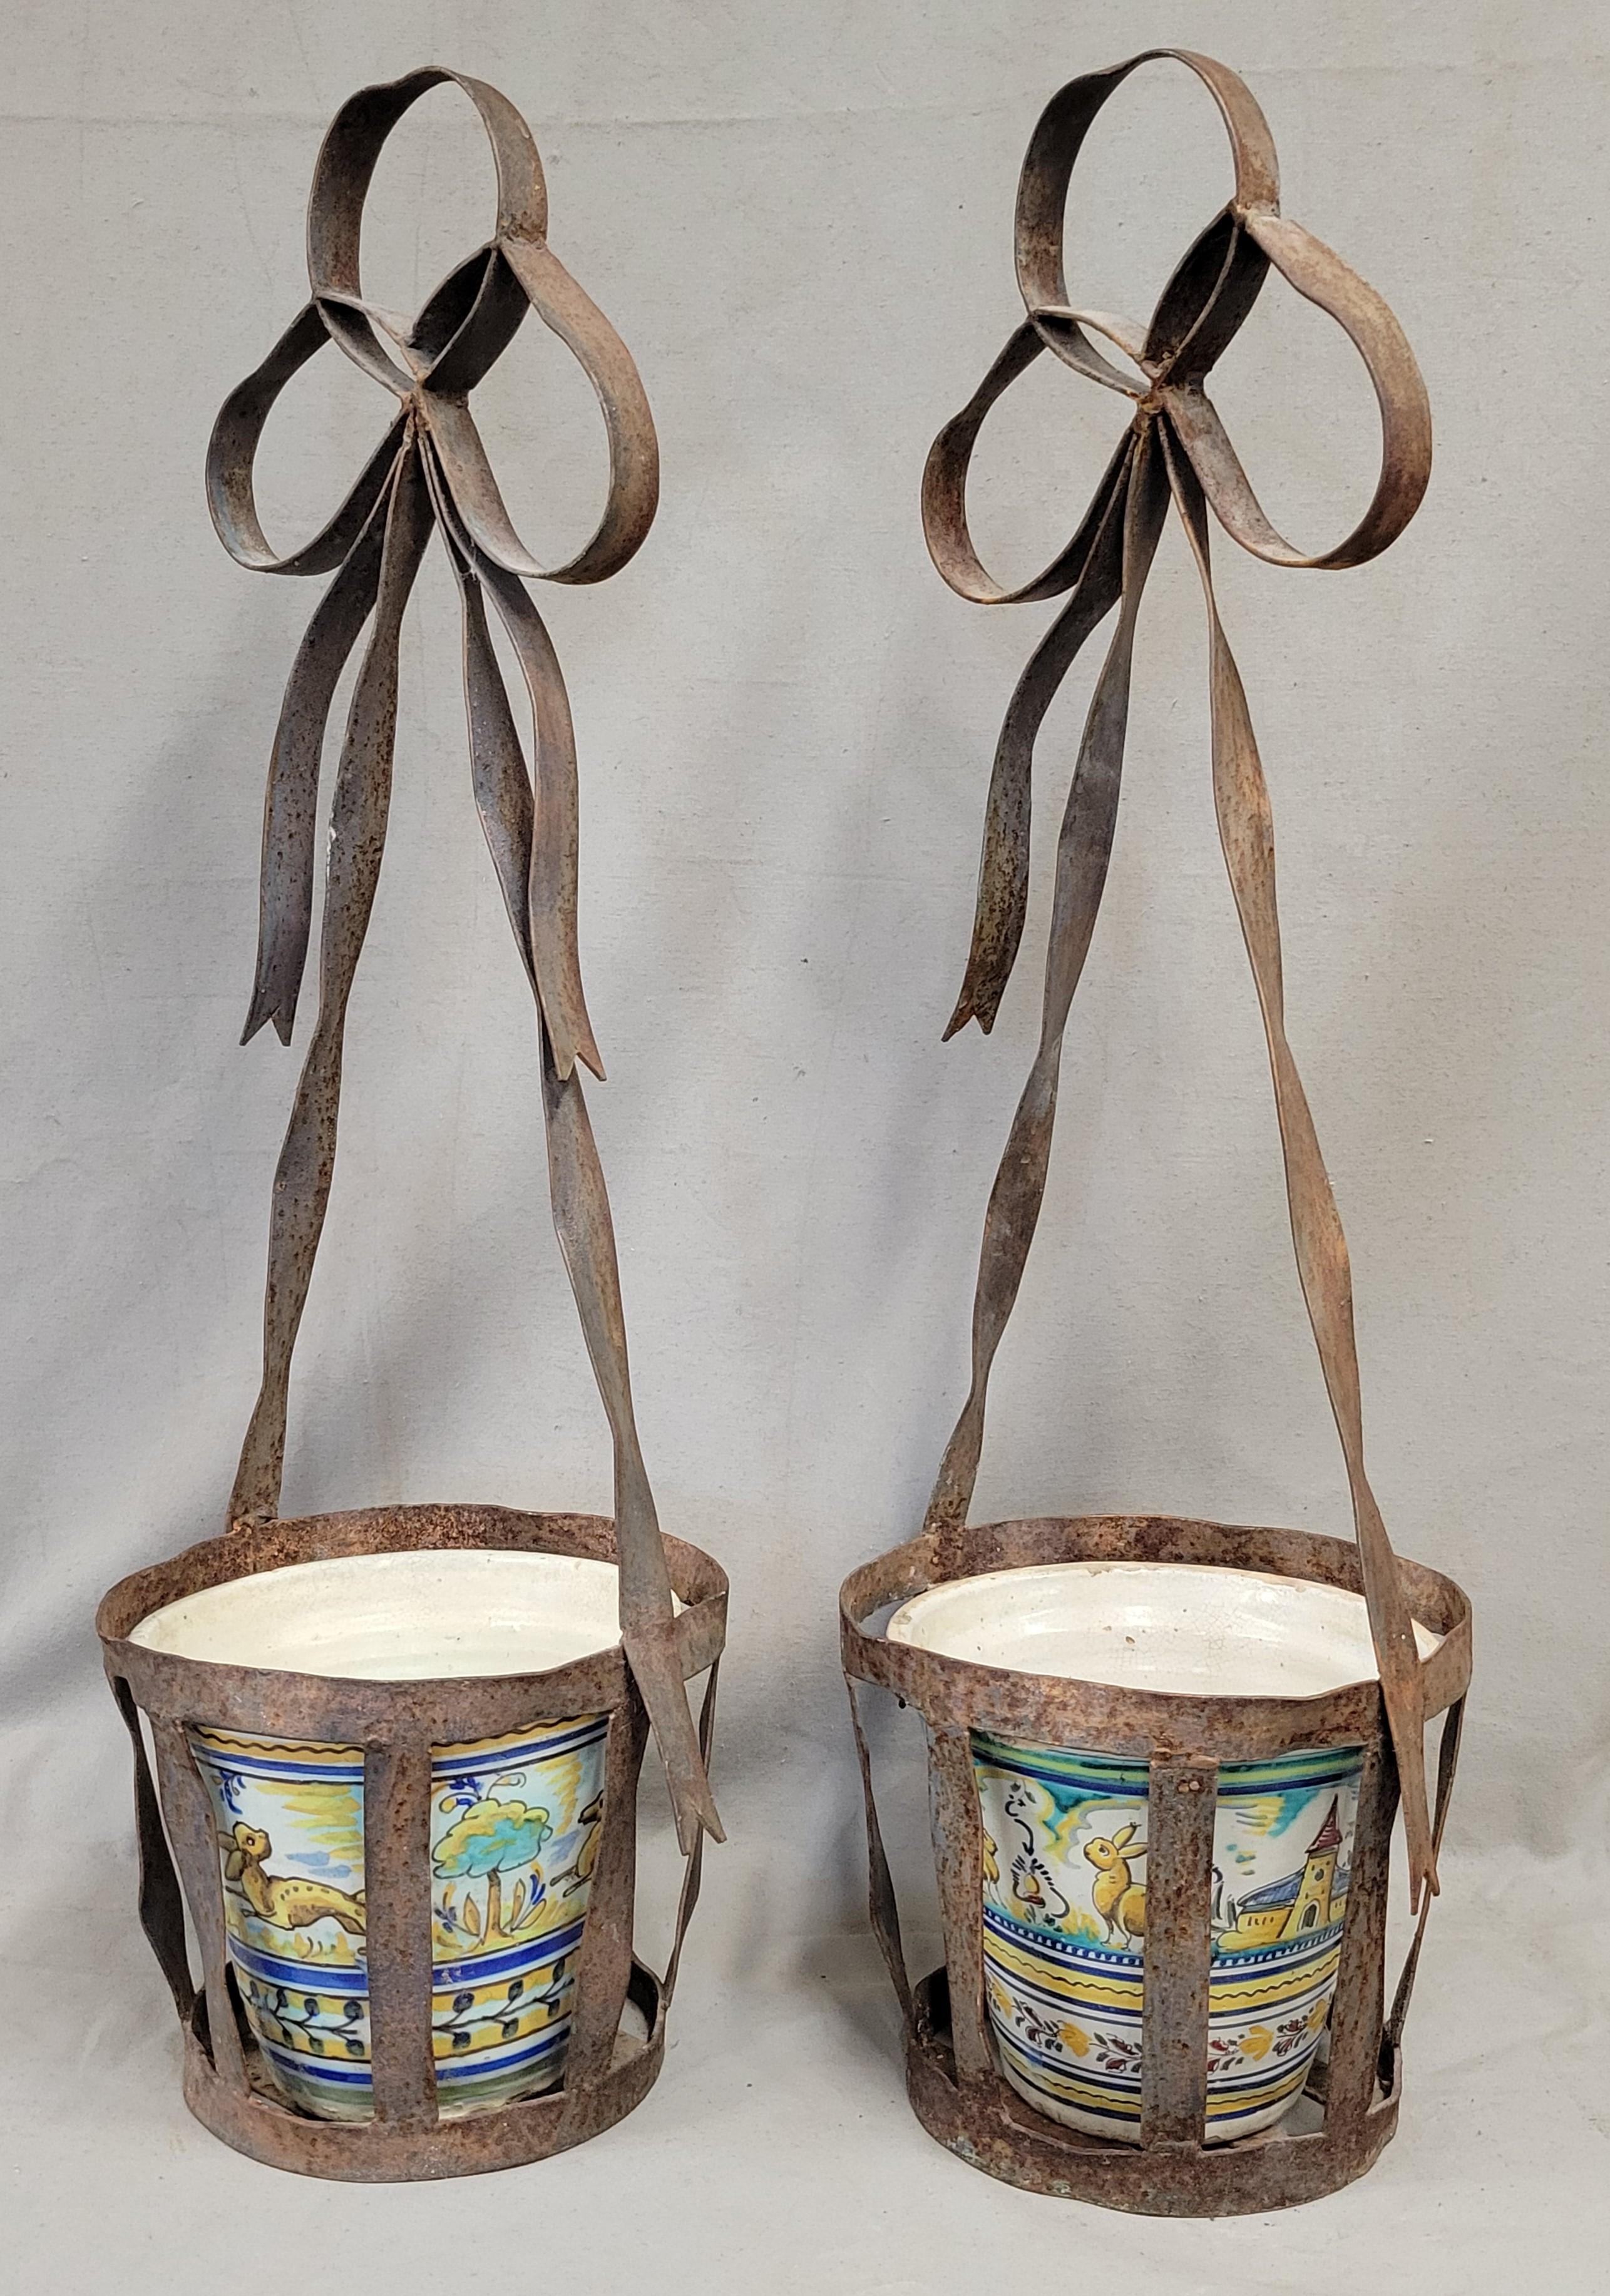 A charming pair of vintage French planters comprised of wrought iron and Spanish ceramic pots. These planters could be hung from hooks or placed on the ground or a table top. Collected in France. 
Iron 